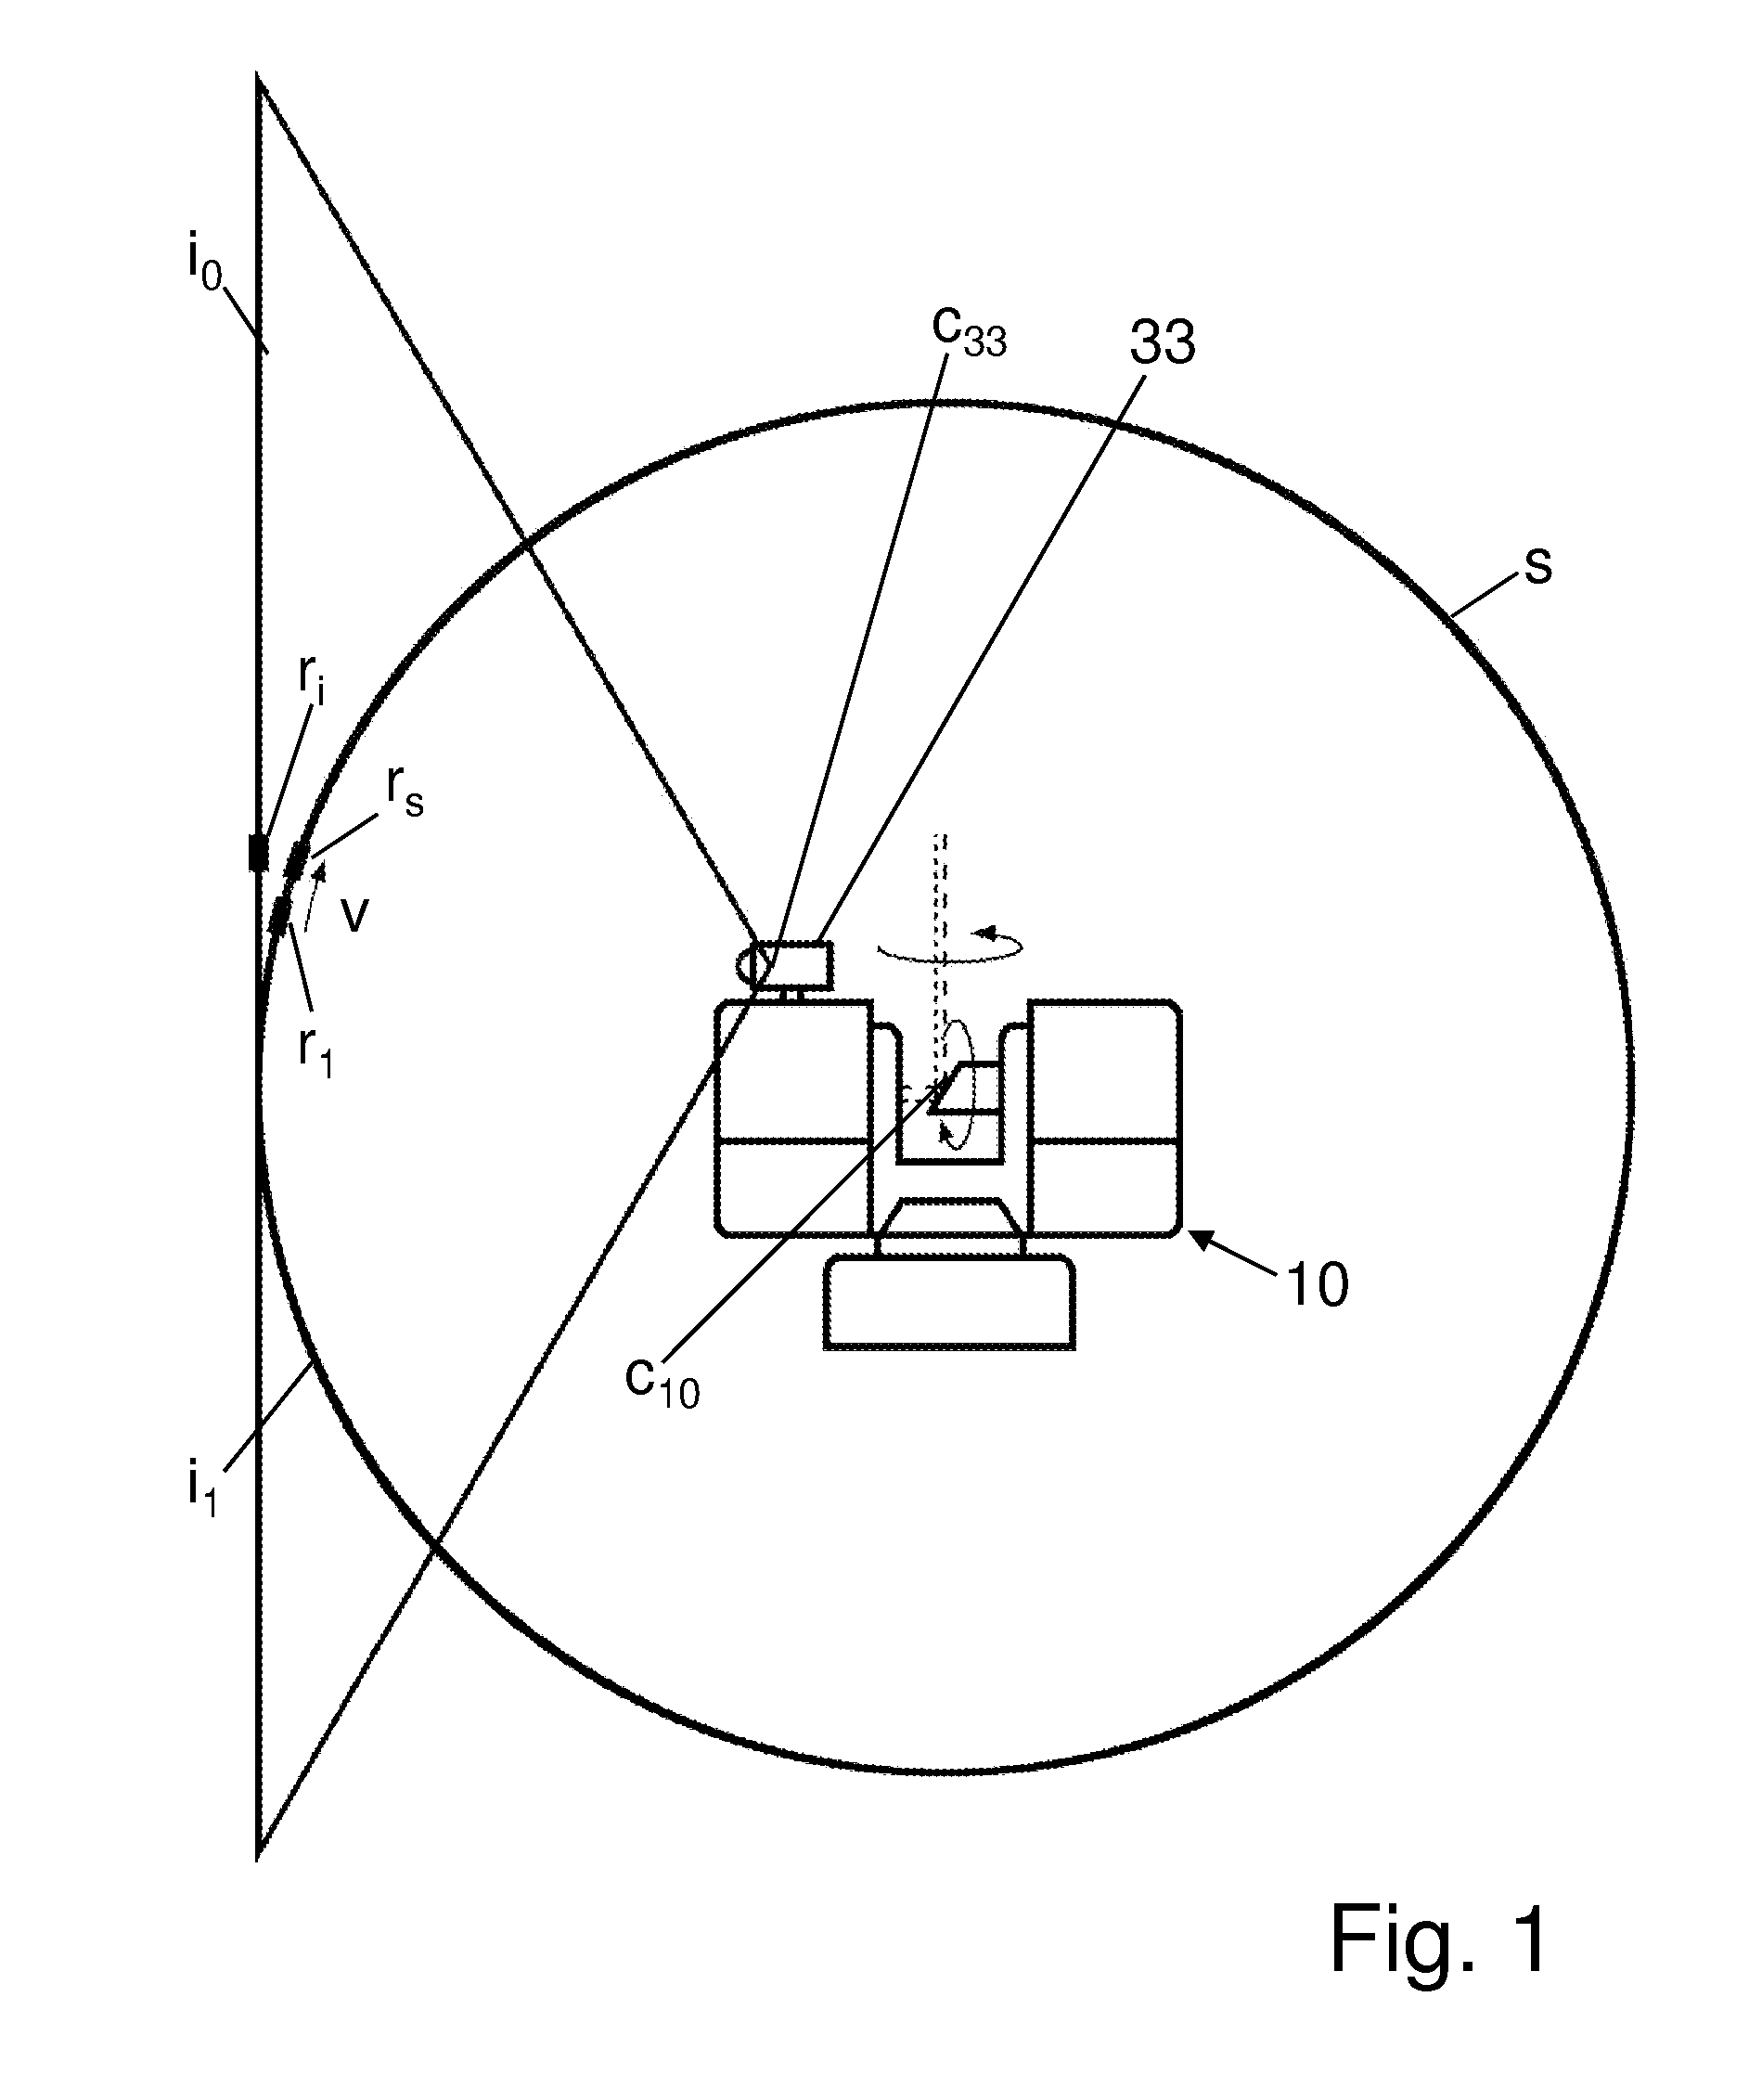 Method for optically scanning and measuring an environment